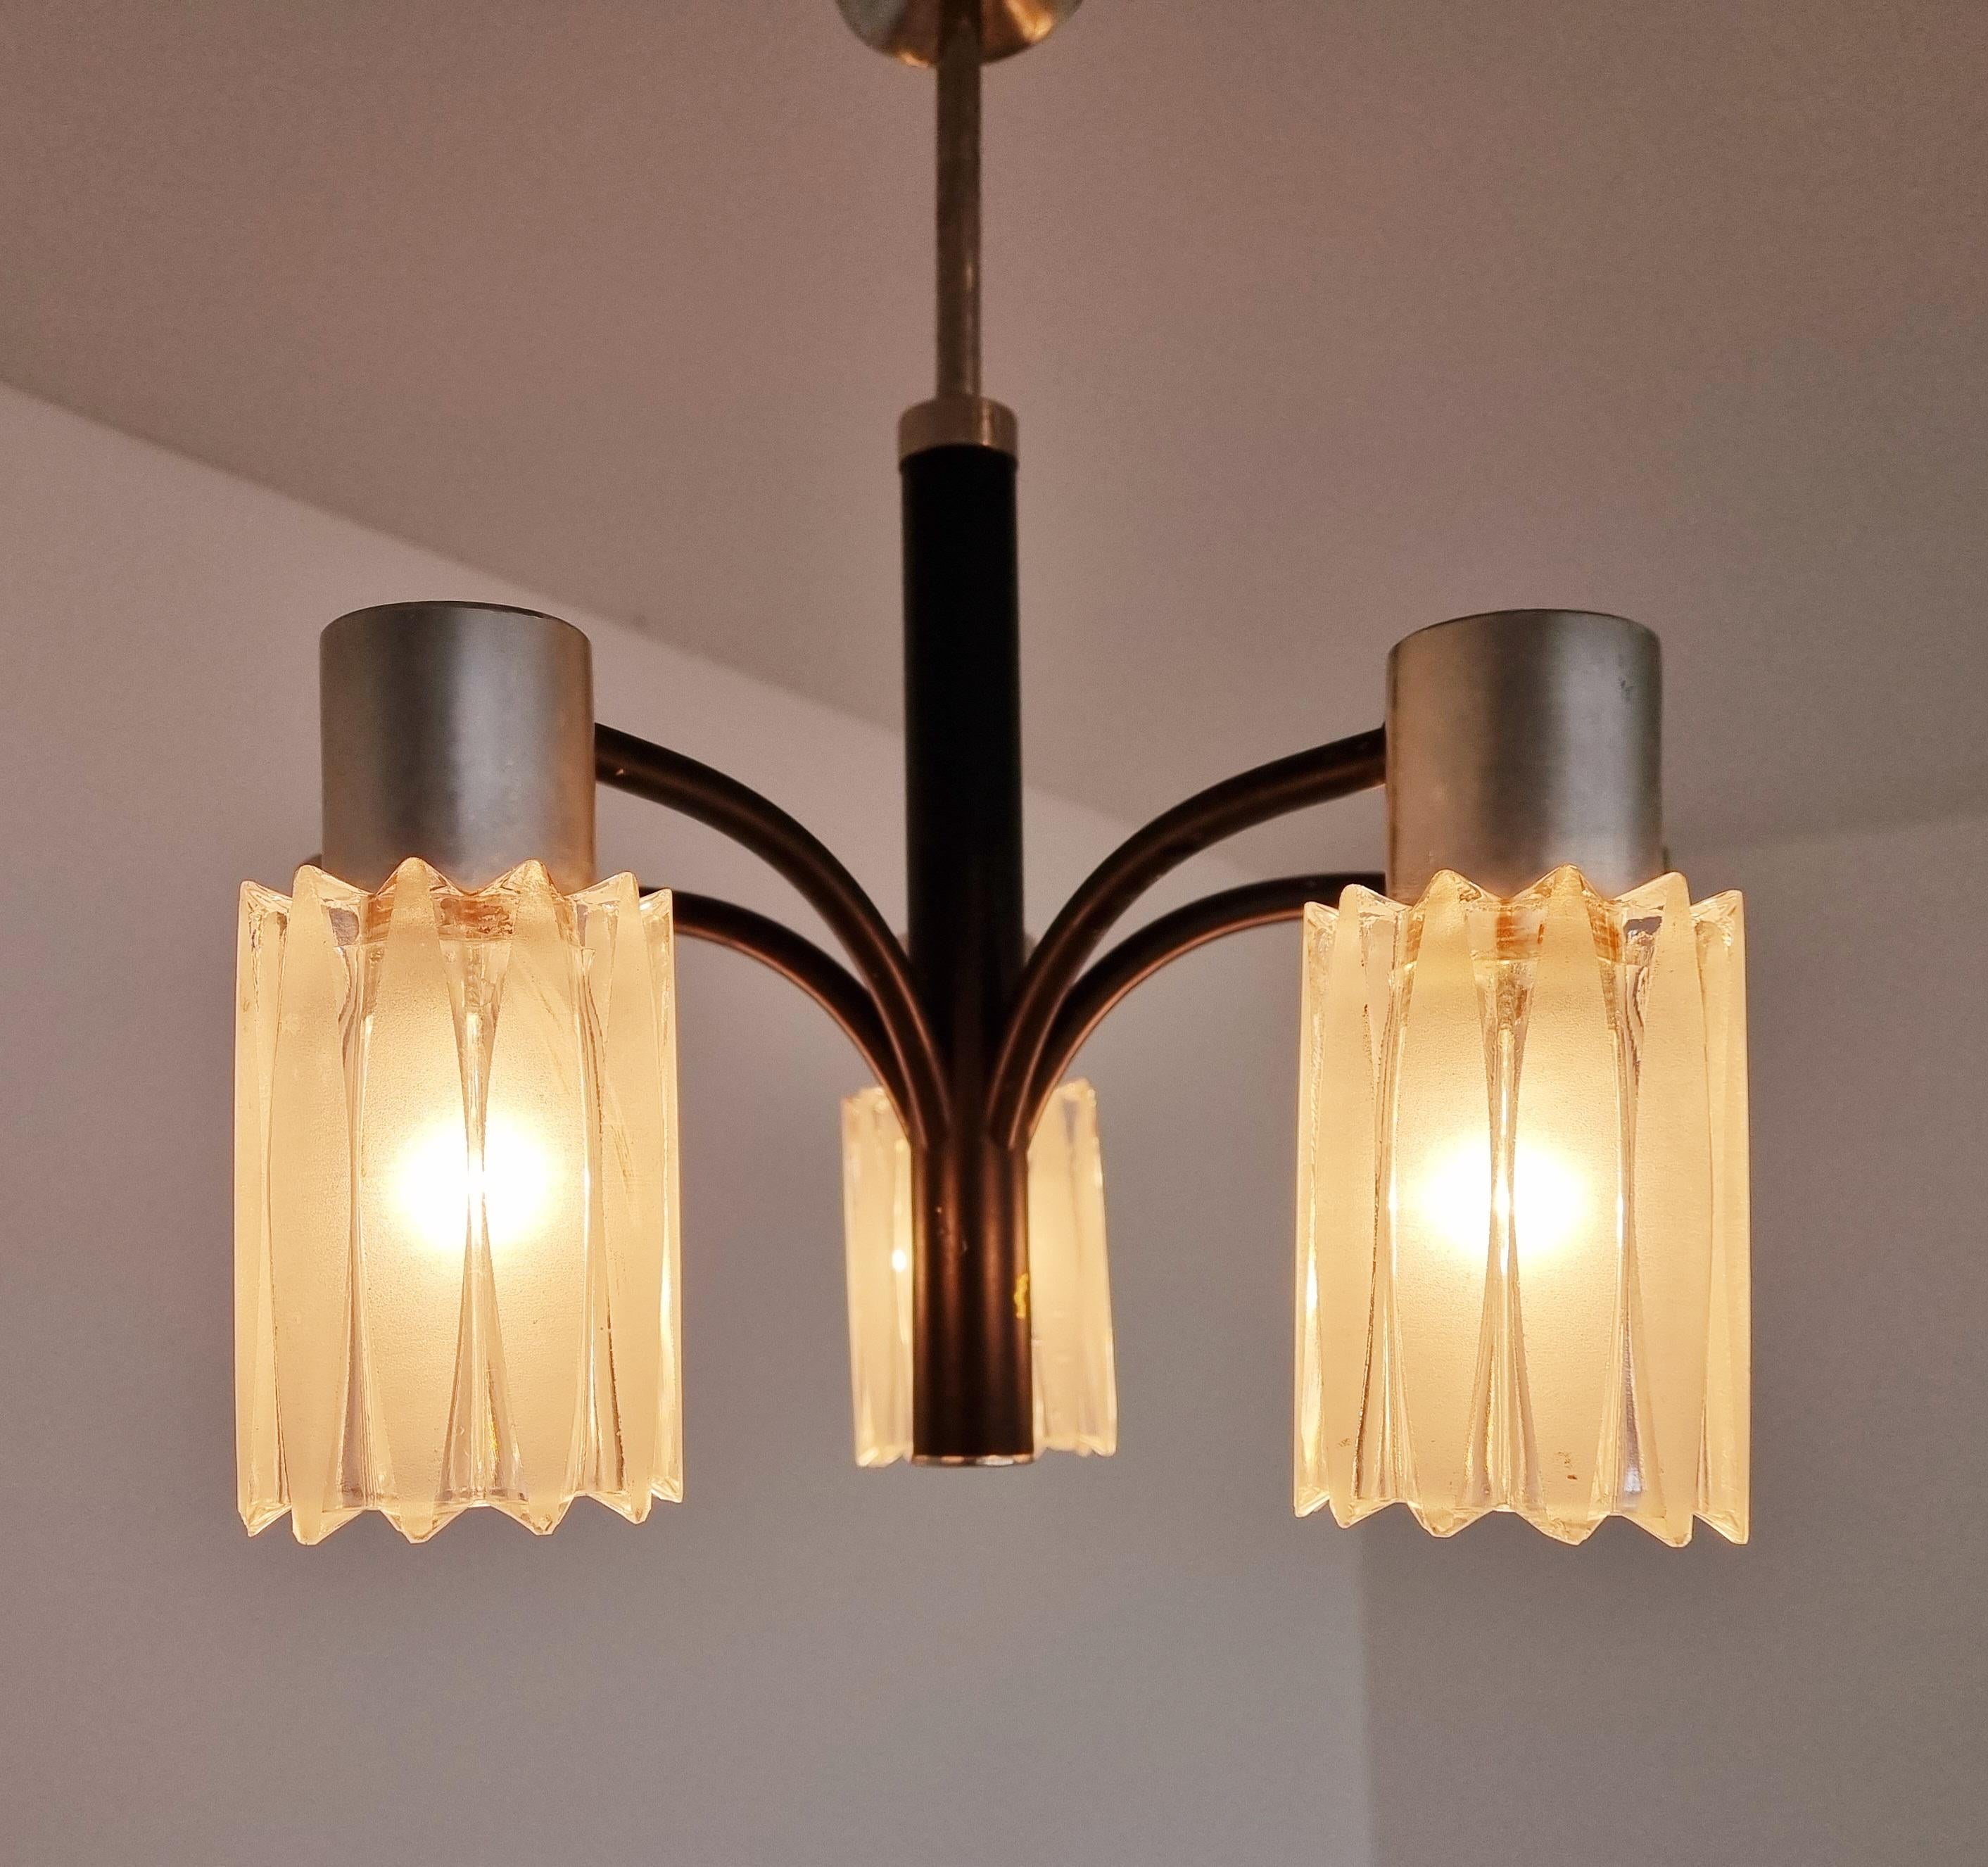 Very Rare Midcentury Chandelier, Murano Glass, Italy, 1960s For Sale 6